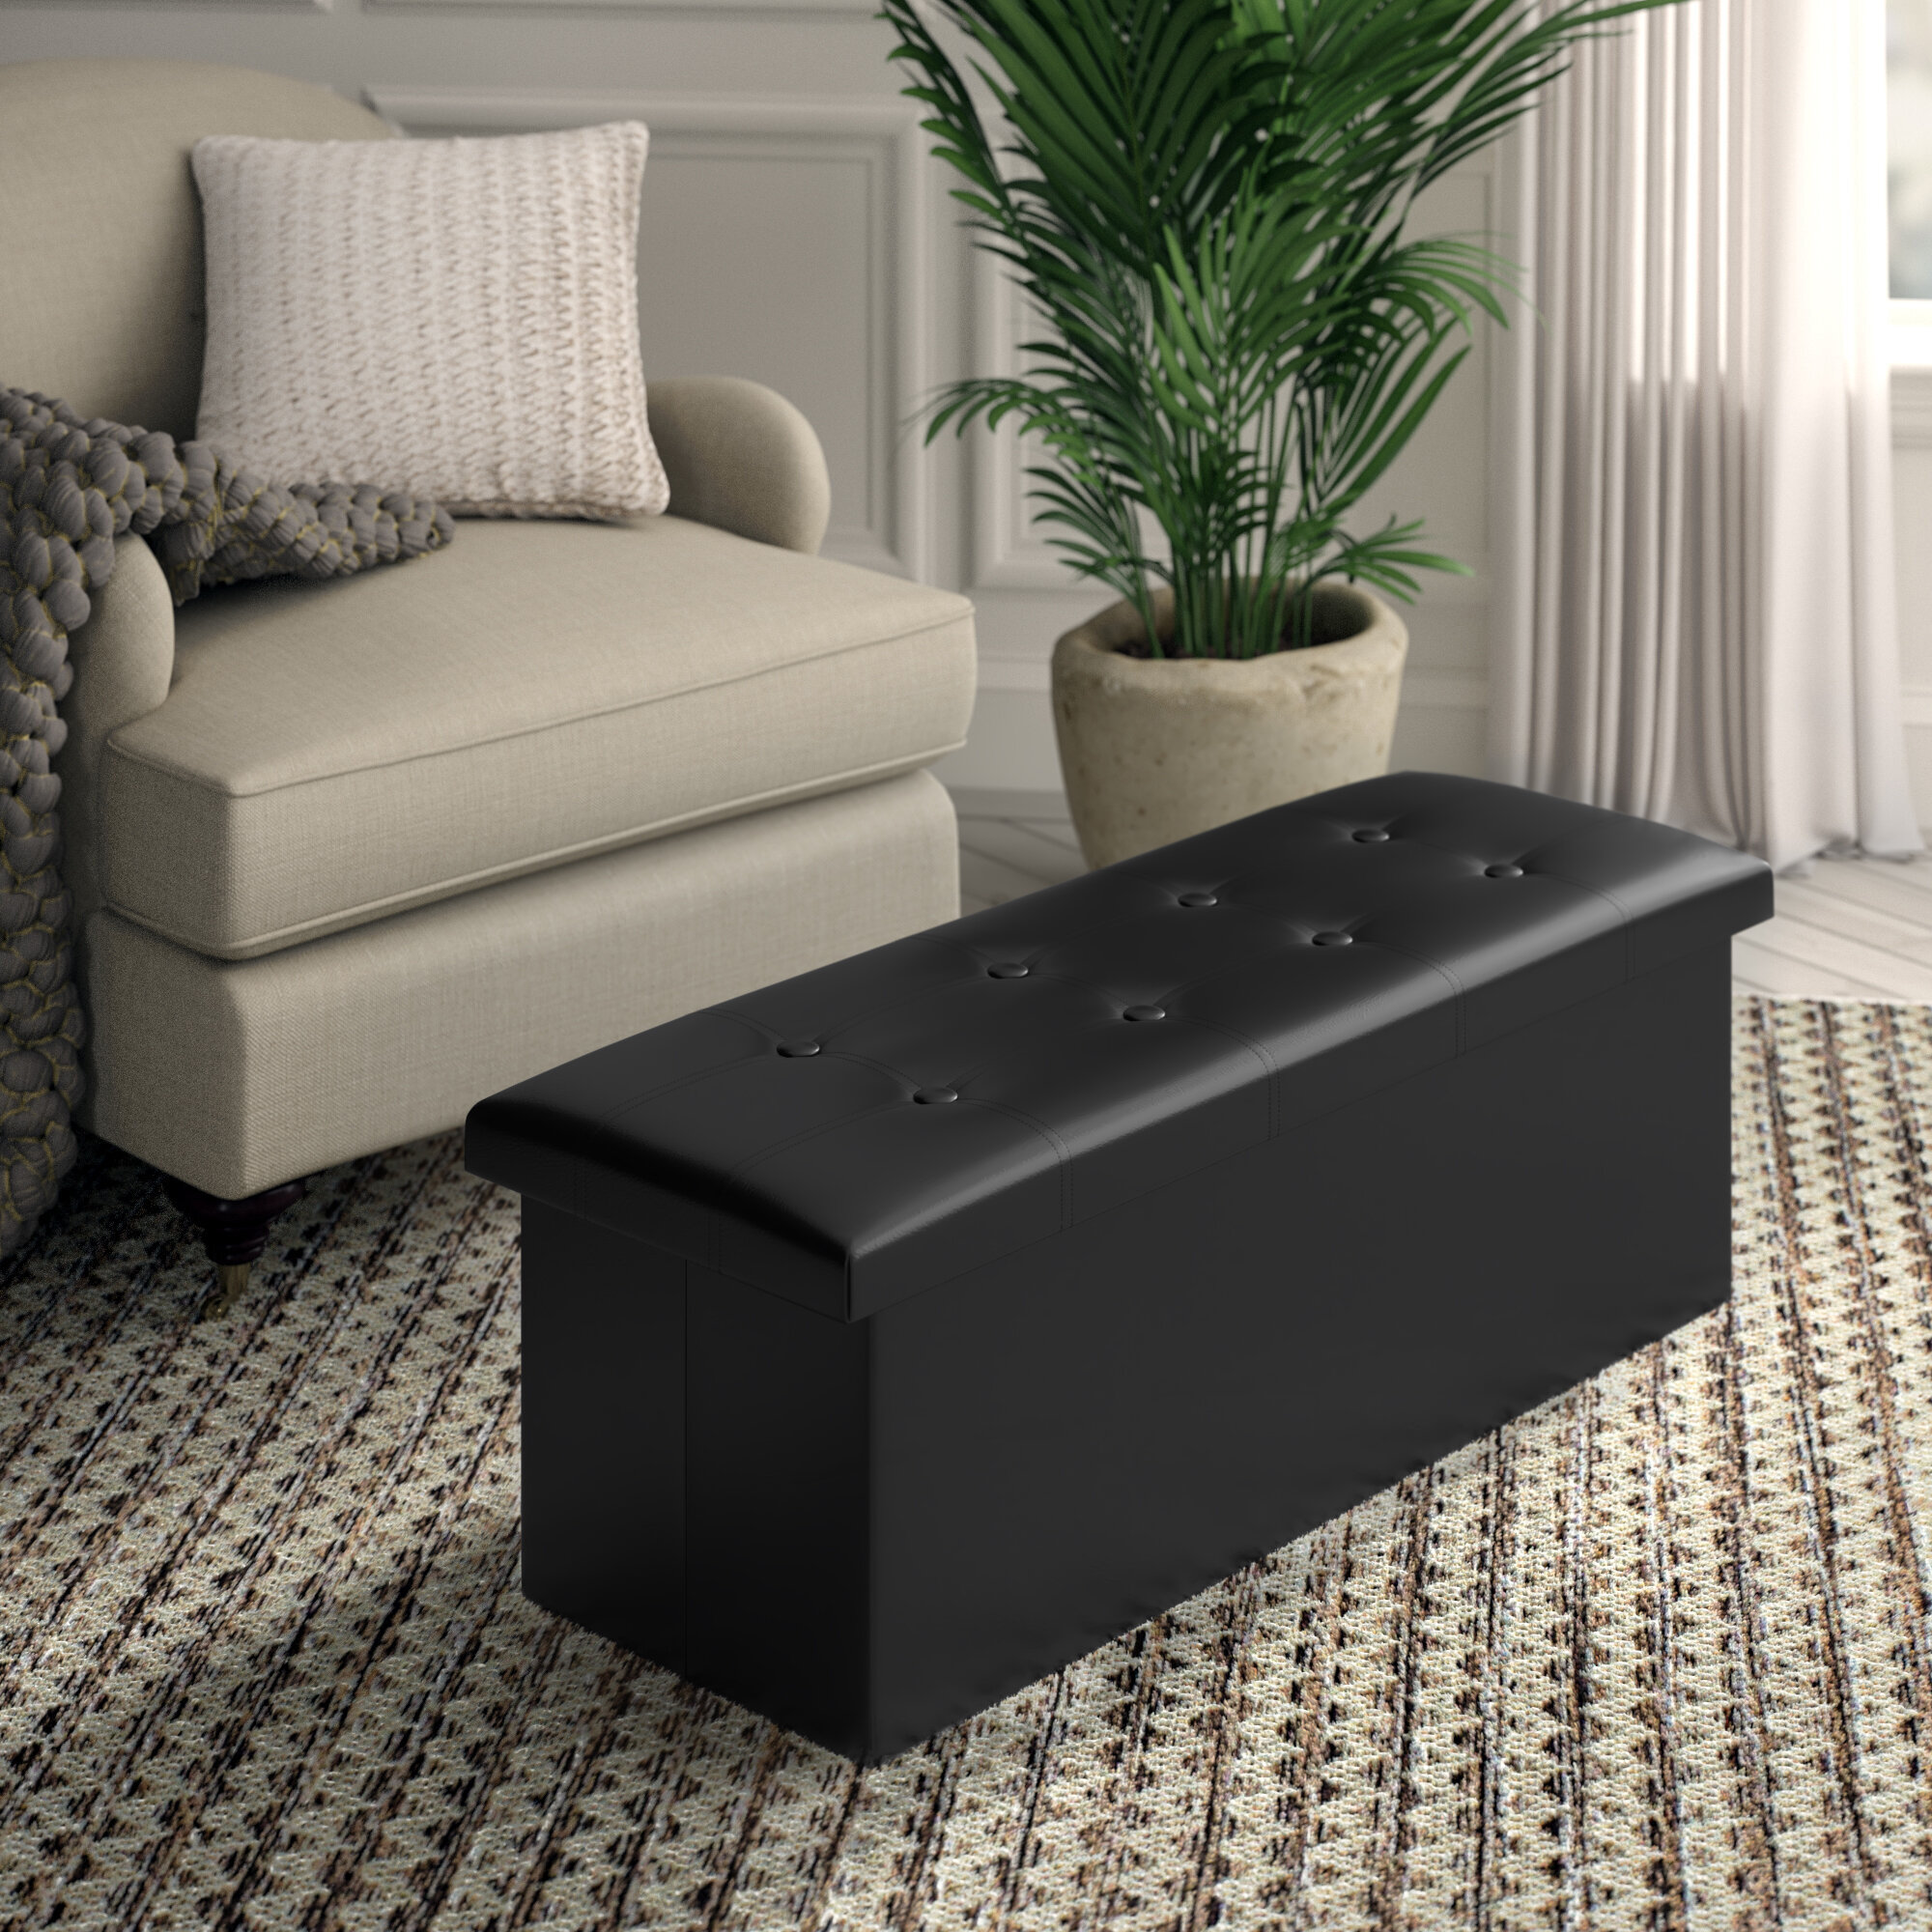 Storage Ottoman Blanket Box PU Leather Foot Stool Couch Toy Bed Large BLACK 